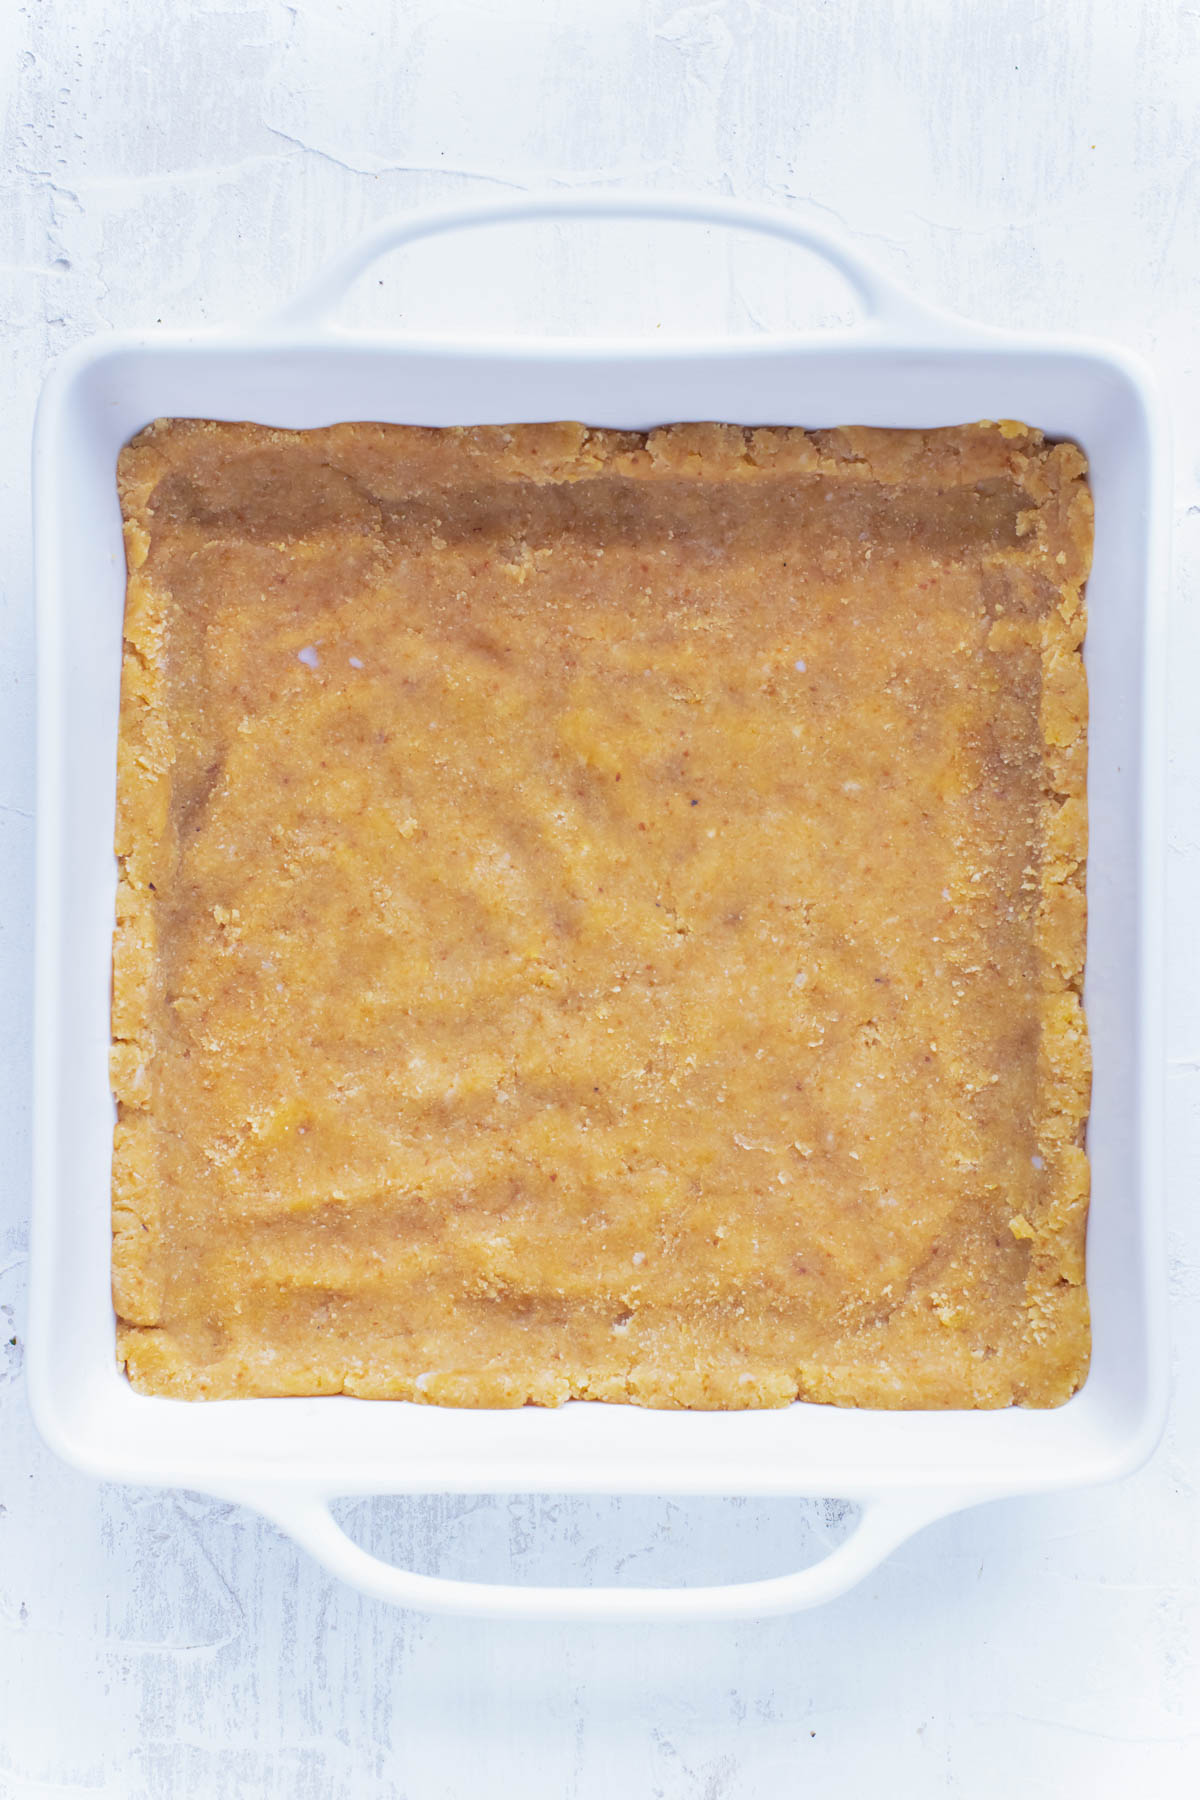 A shortbread crust is pressed into a baking dish.